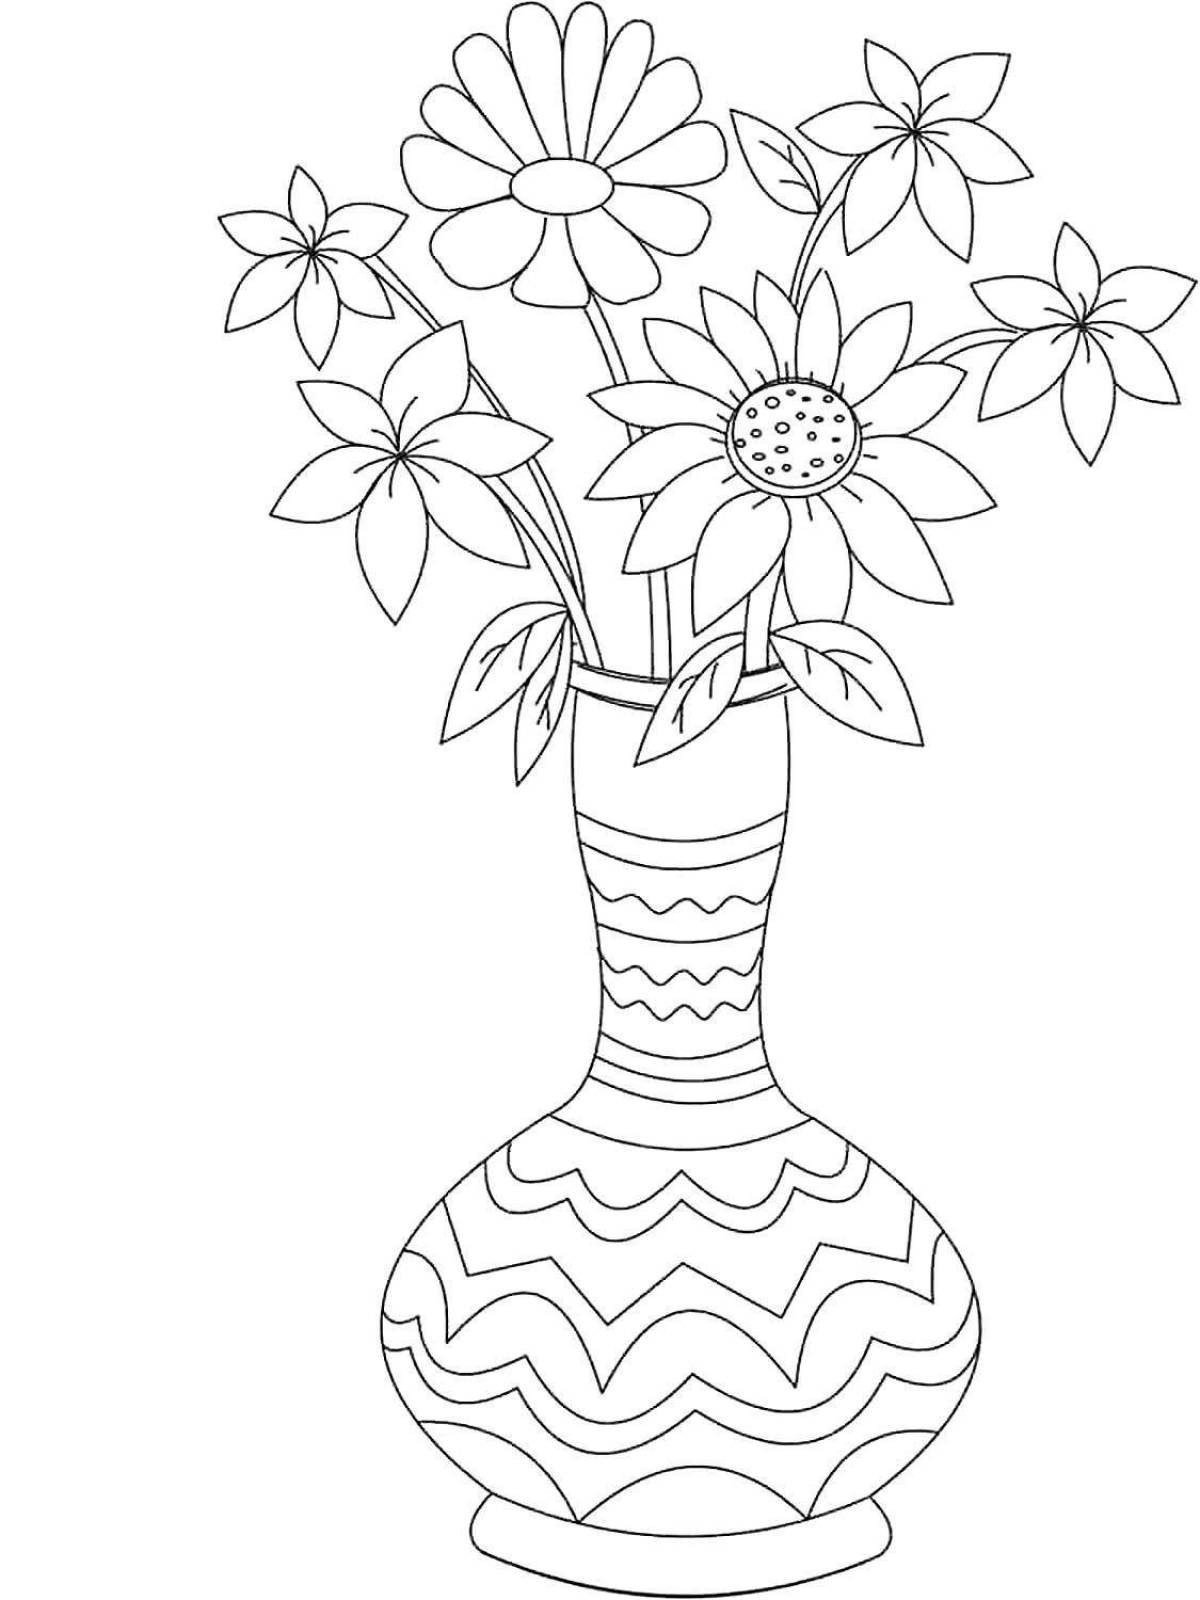 Playful coloring flowers in a vase for kids and teens